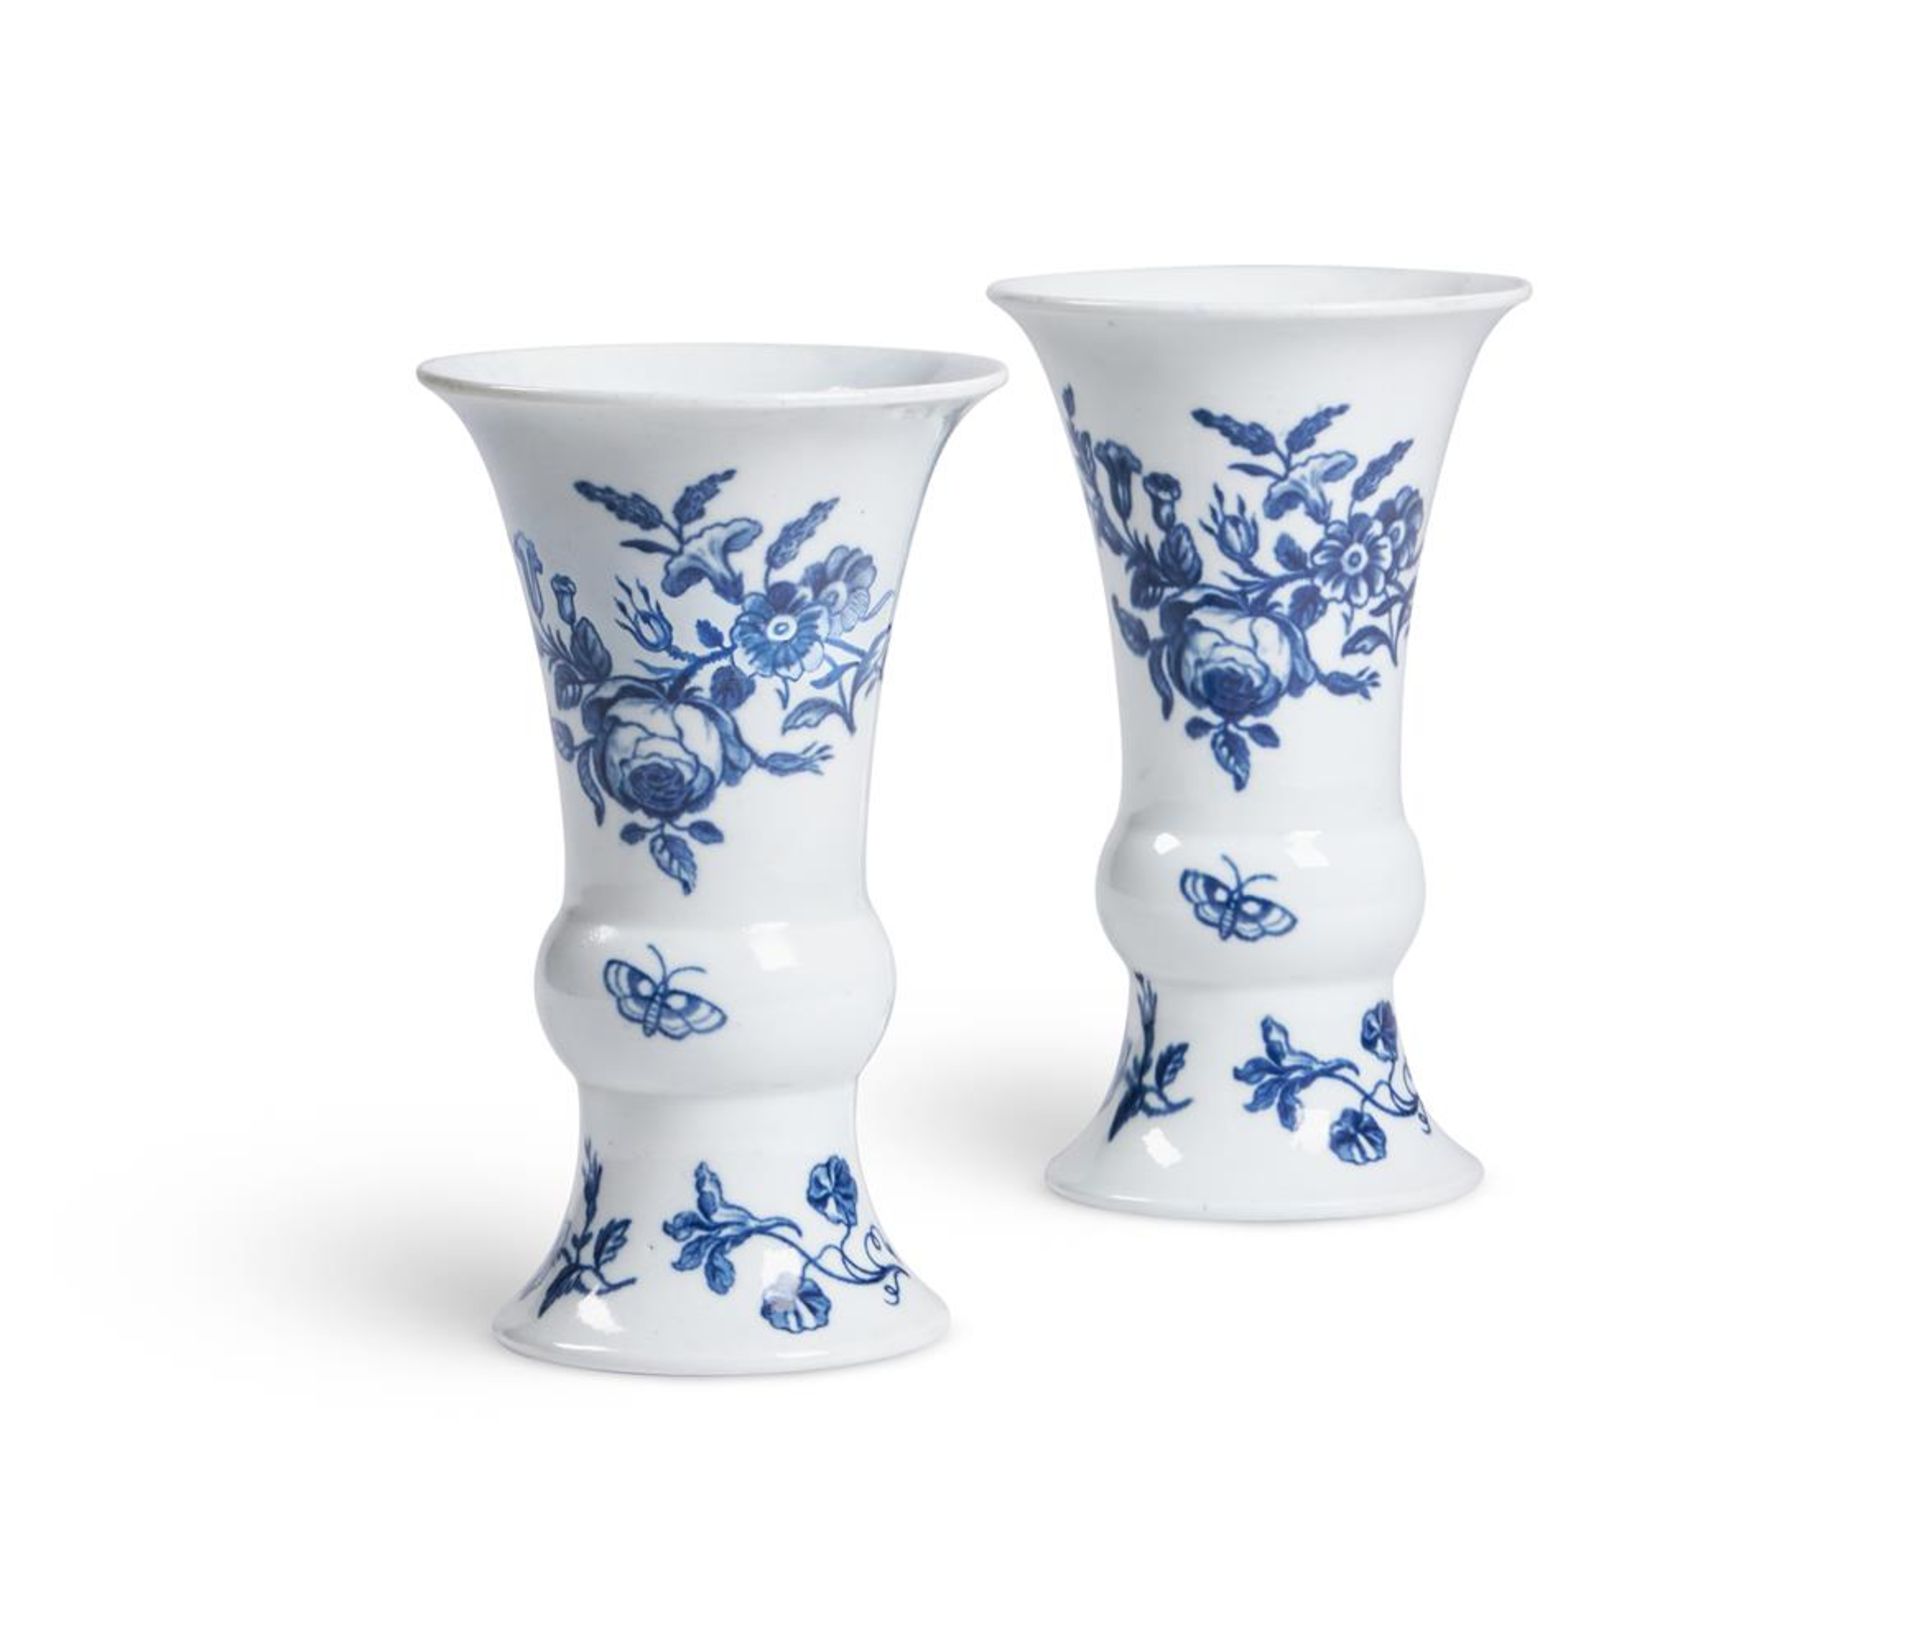 A PAIR OF WORCESTER BLUE AND WHITE PRINTED FLARED VASES, CIRCA 1780